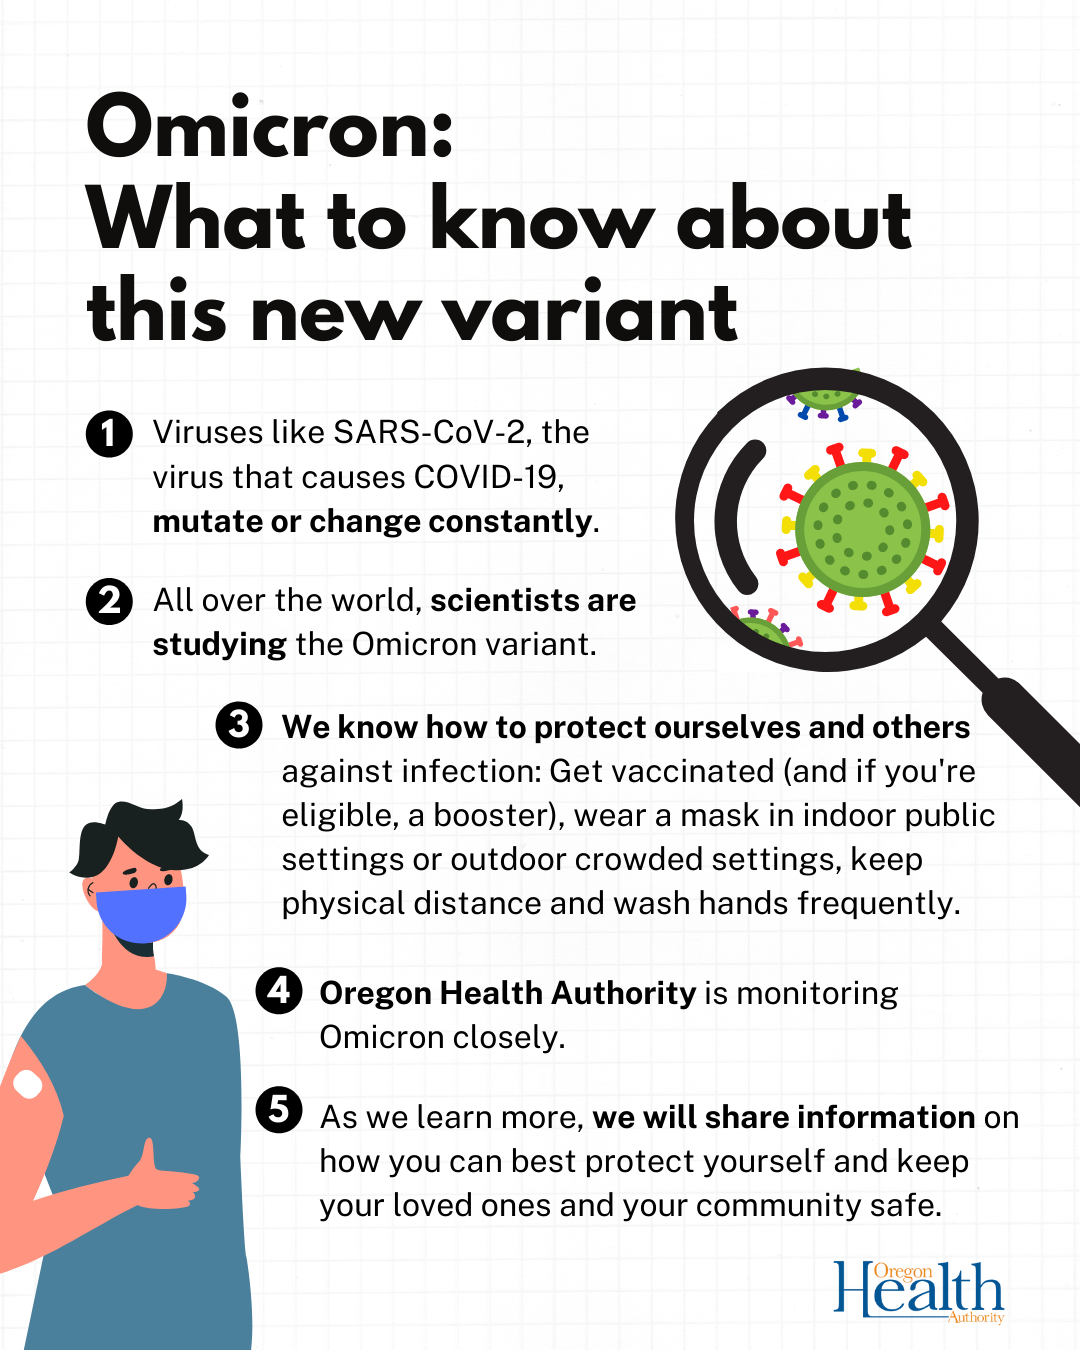 Graphic repeats information in the full article on what we know about the new Omicron variant. 